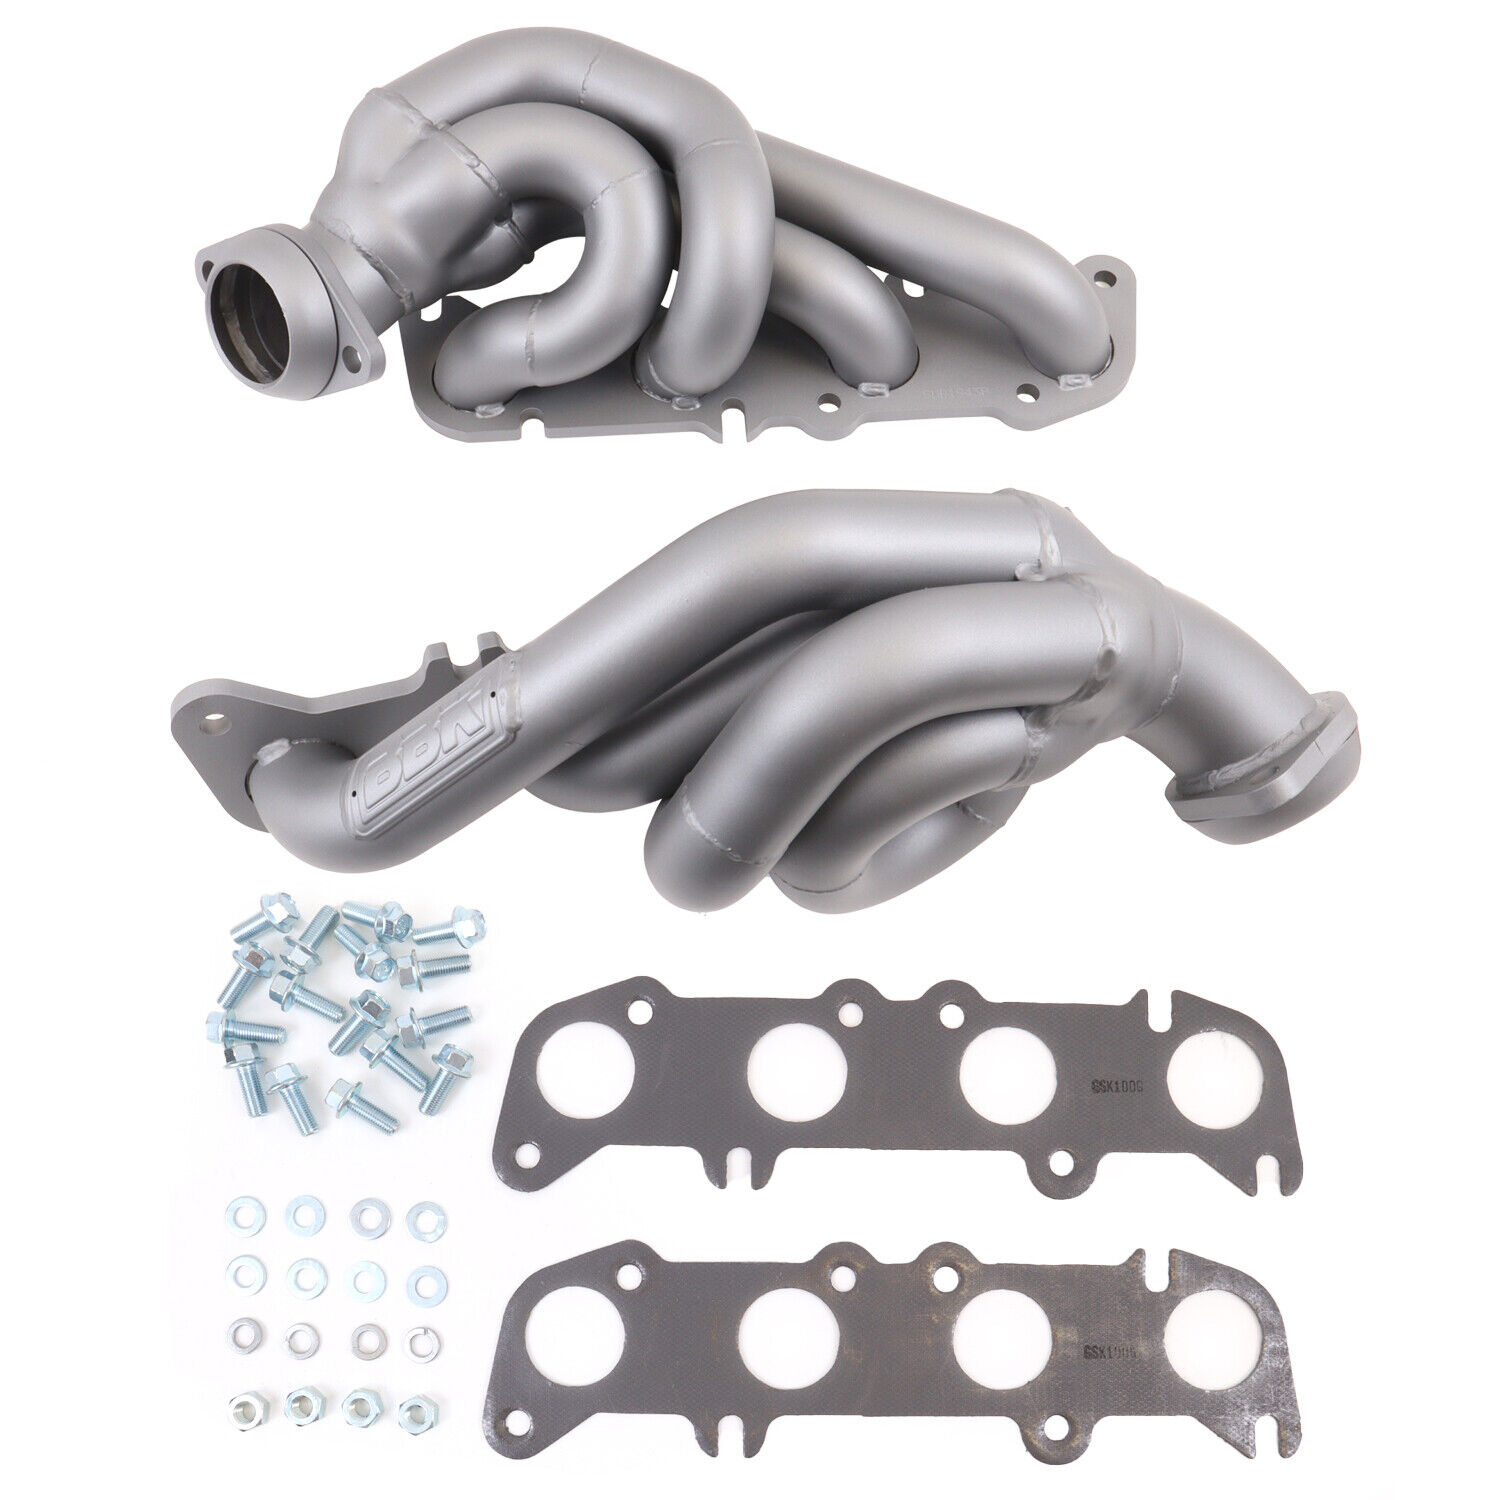 Fits 2011-14 Ford F150 Coyote 5.0 Truck 1-3/4 Shorty Tuned Length Headers-1943